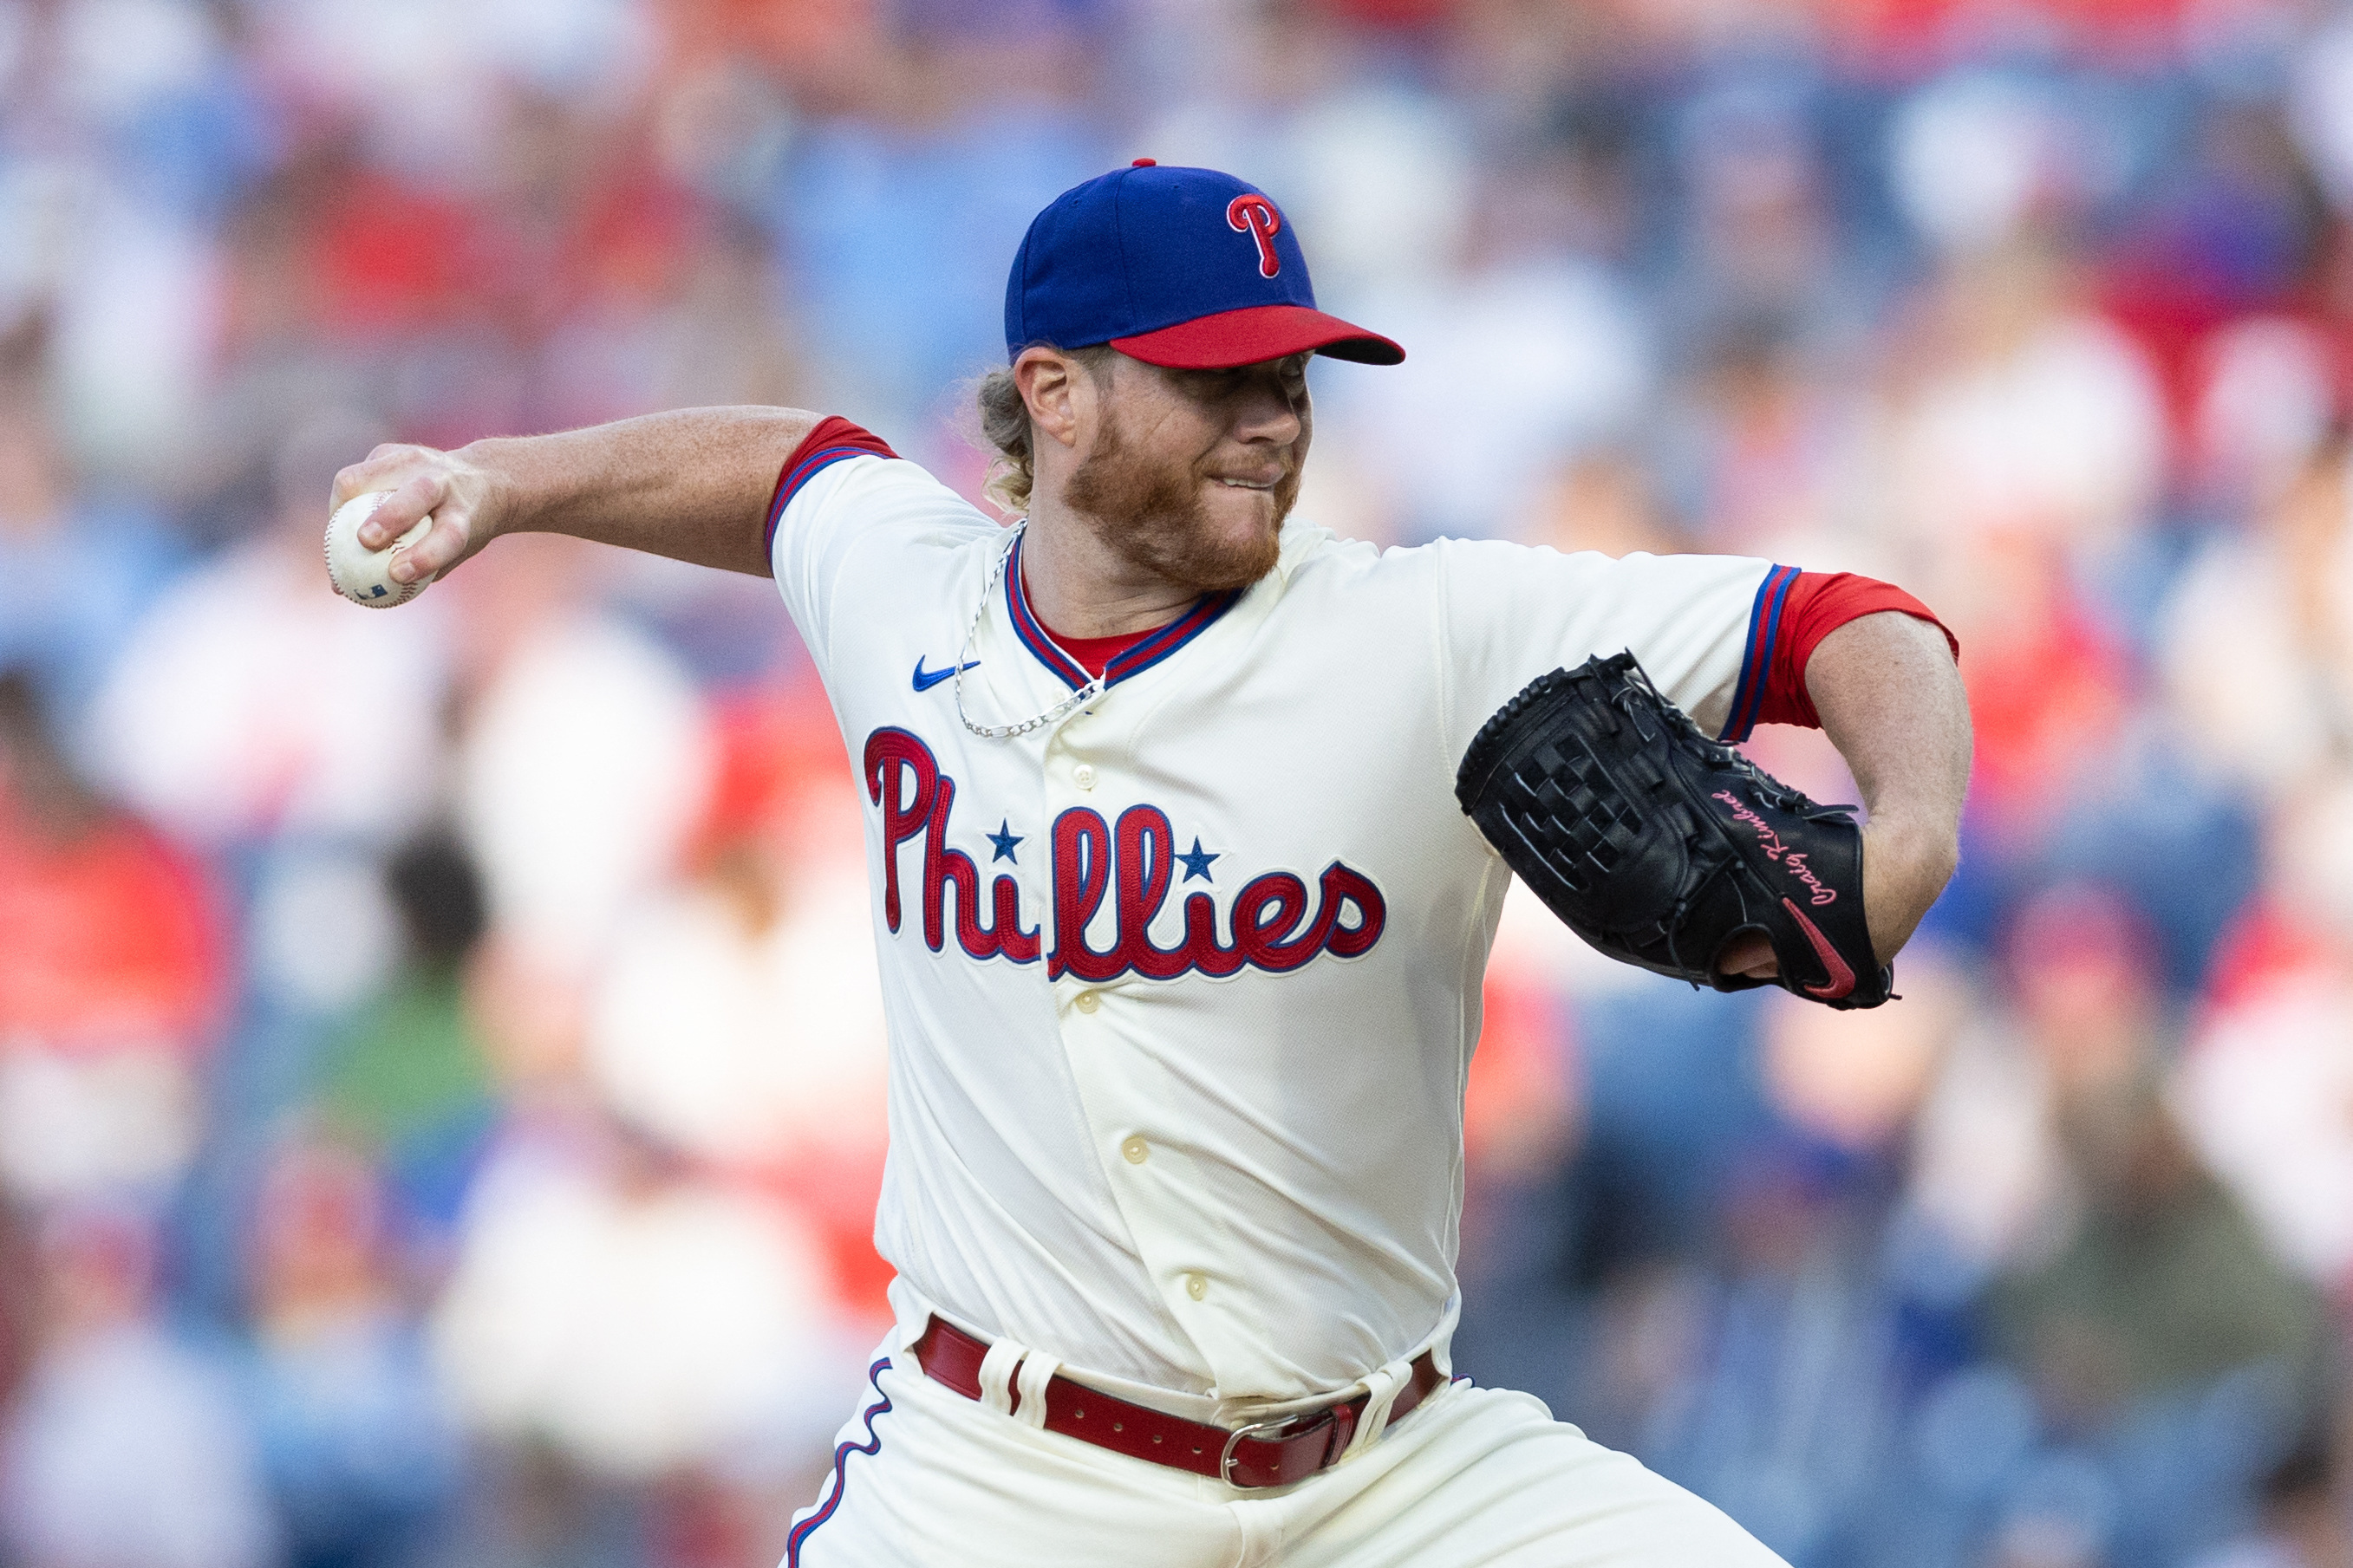 Phillies squeak by Blue Jays in 10 innings thanks to error